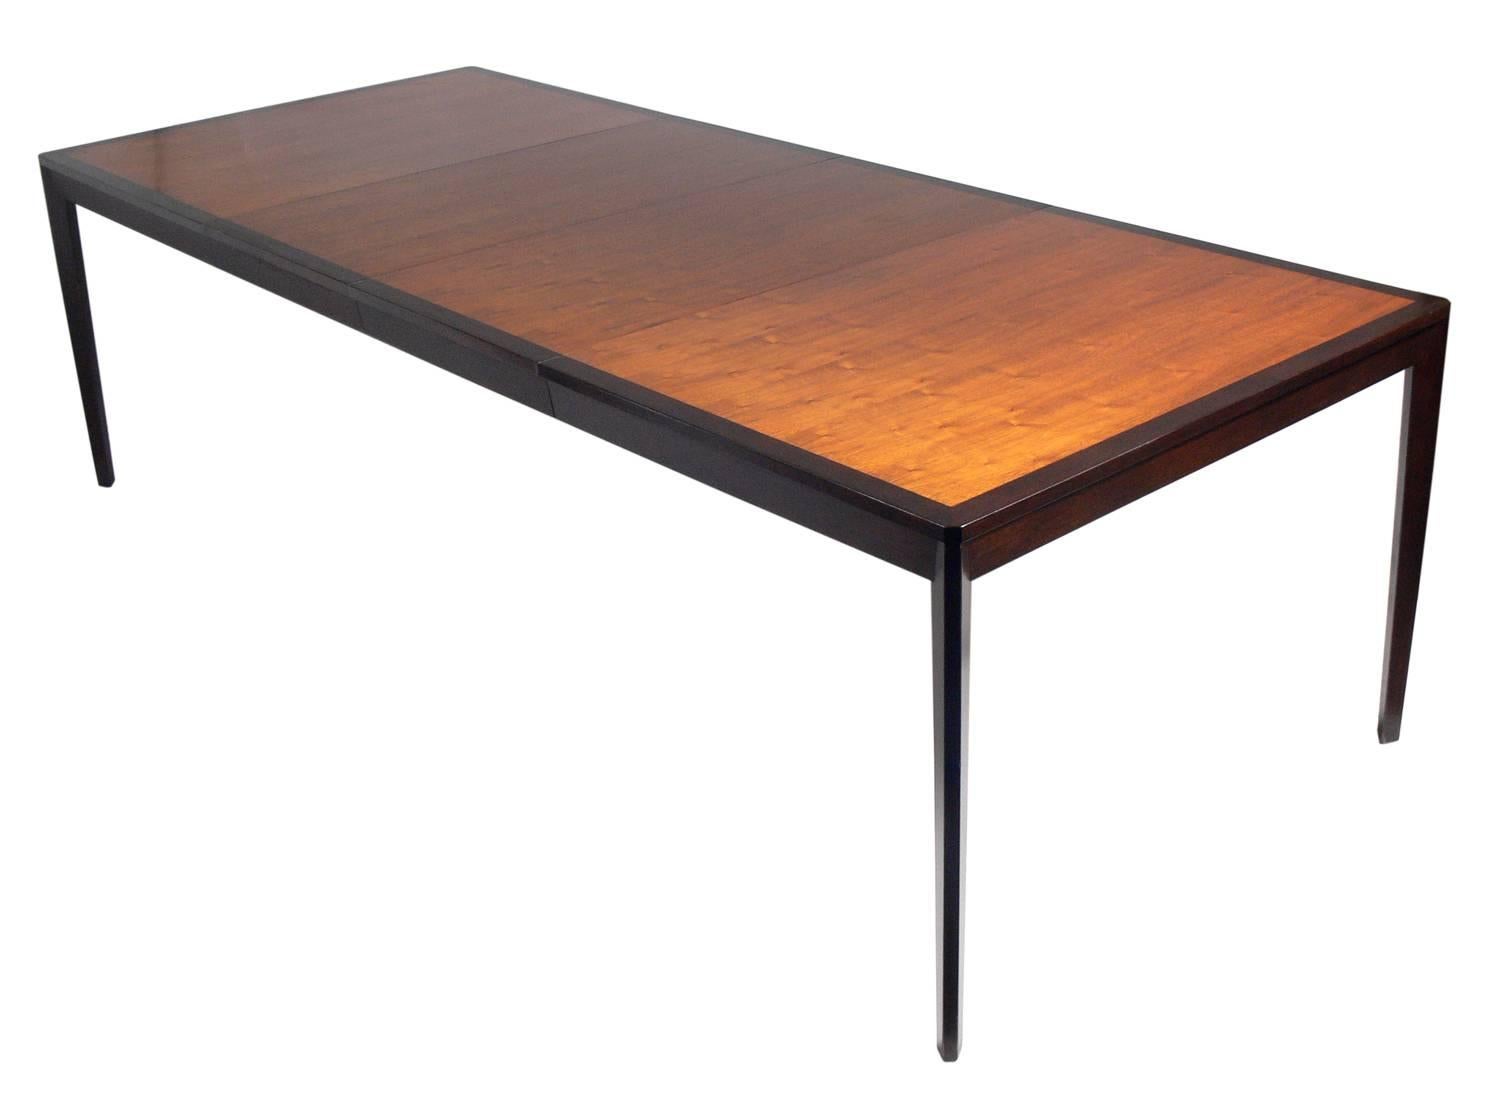 Mid-Century Modern Clean Lined Dining Table by Edward Wormley for Dunbar, Seats Six-Ten